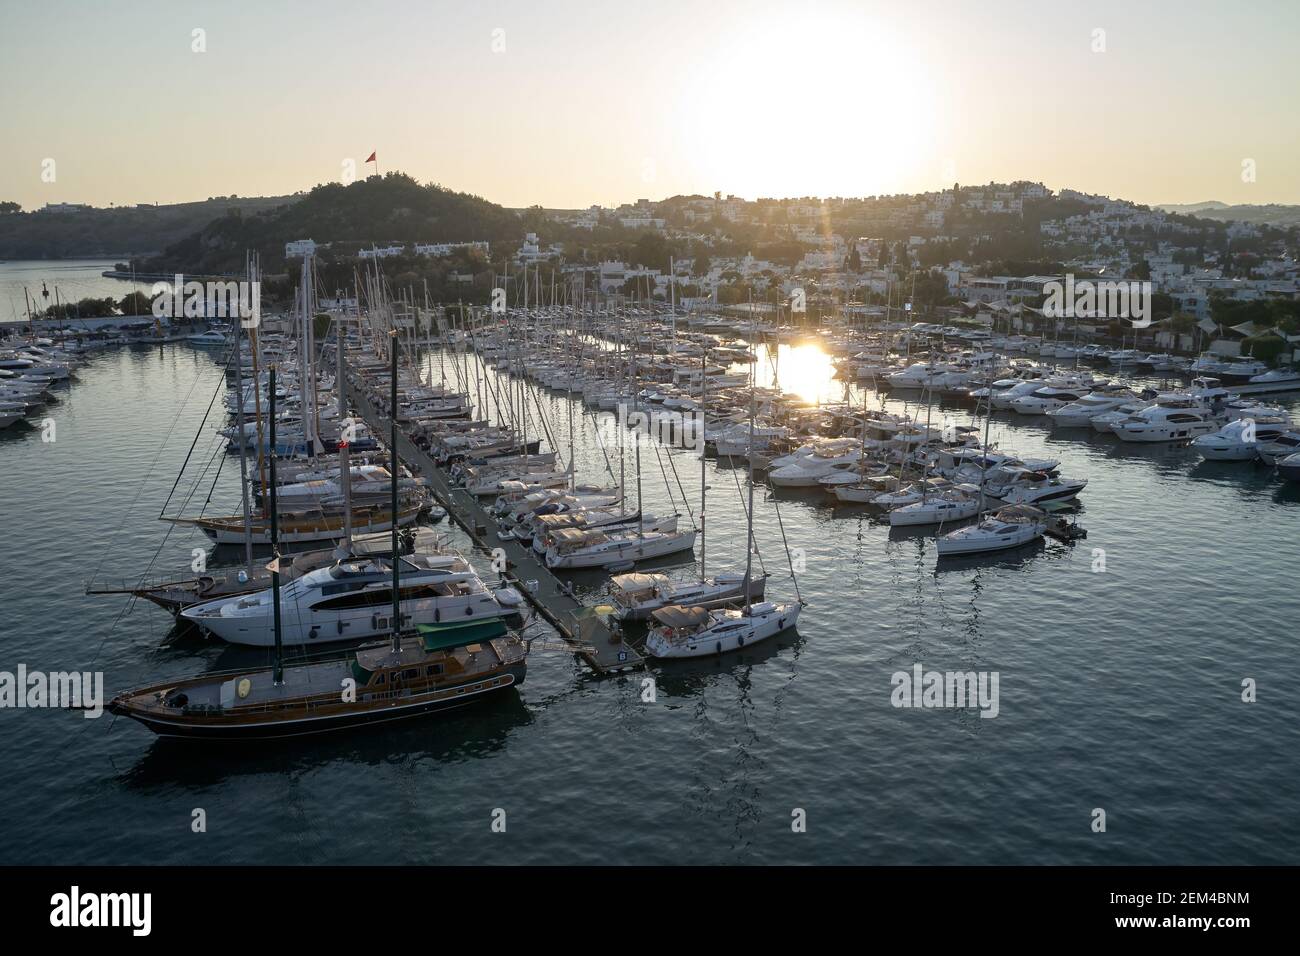 View of beautiful harbor and boats at sunset. Stock Photo